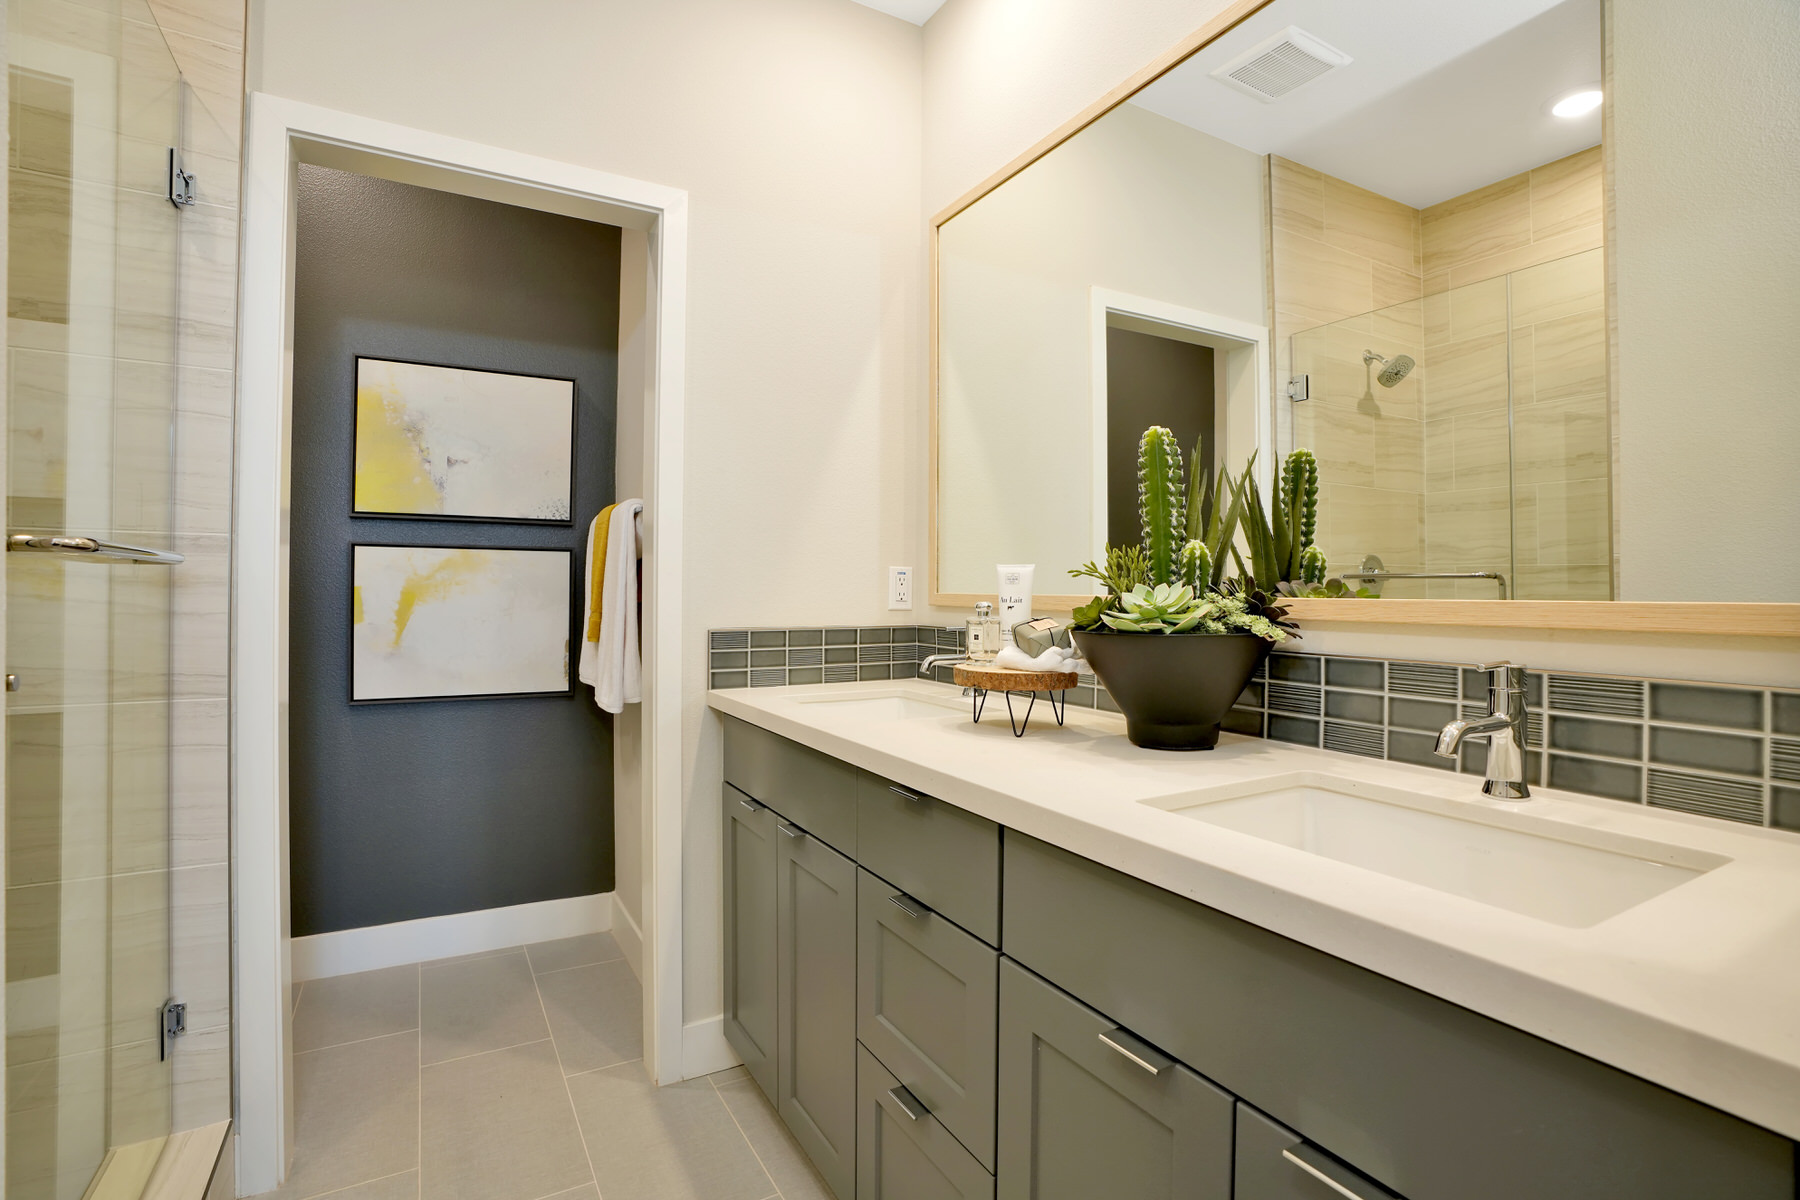 Primary Bath in Plan 3A at Townes at Magnolia by Melia Homes in Anaheim, CA